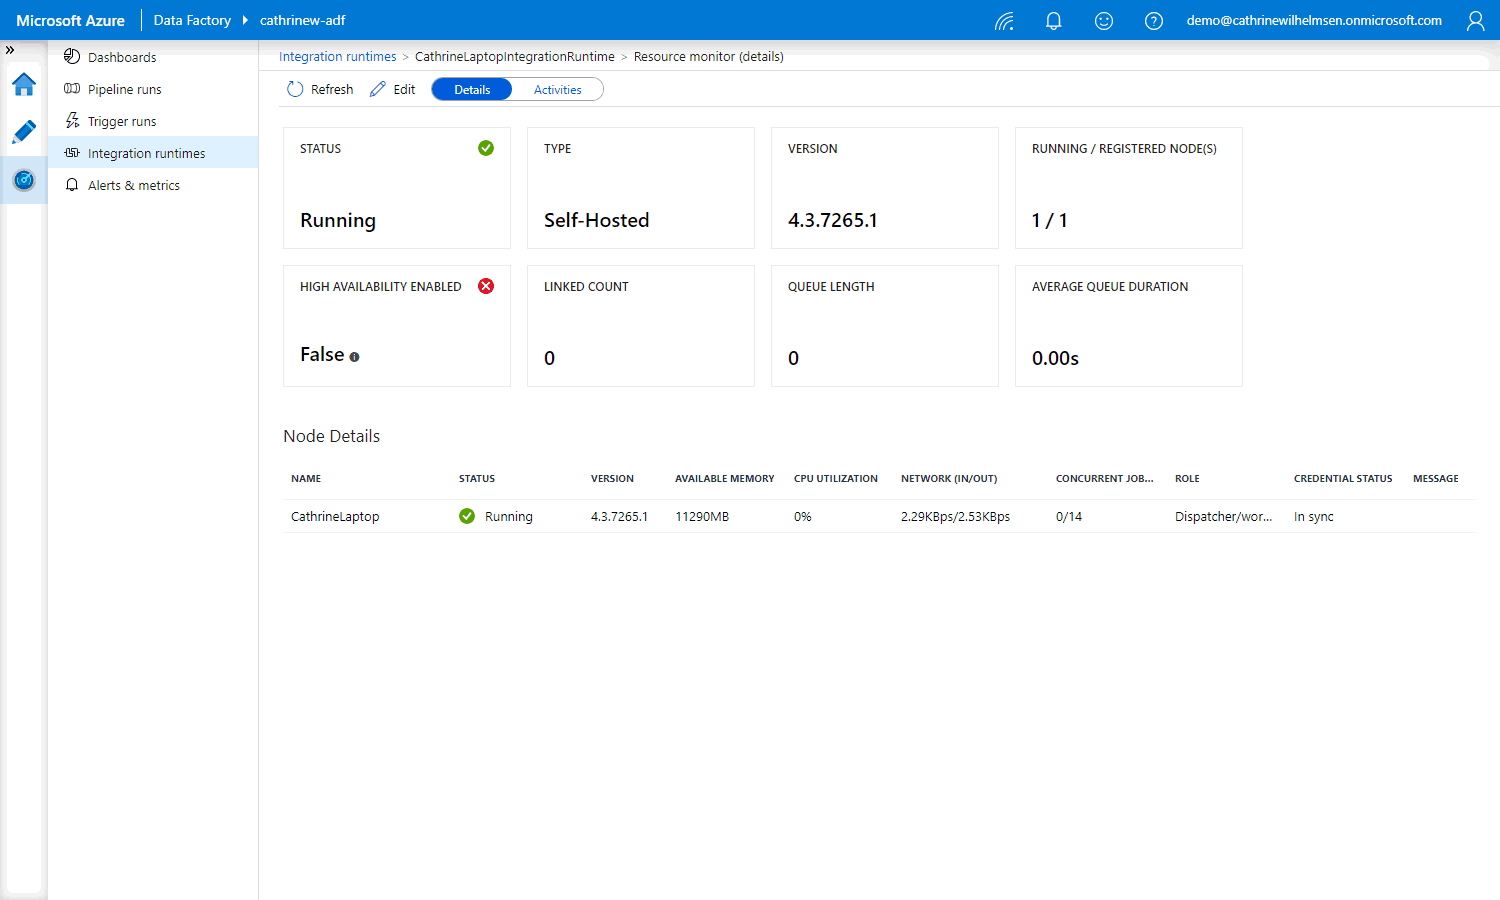 Screenshot of the Azure Data Factory interface with the monitoring page open